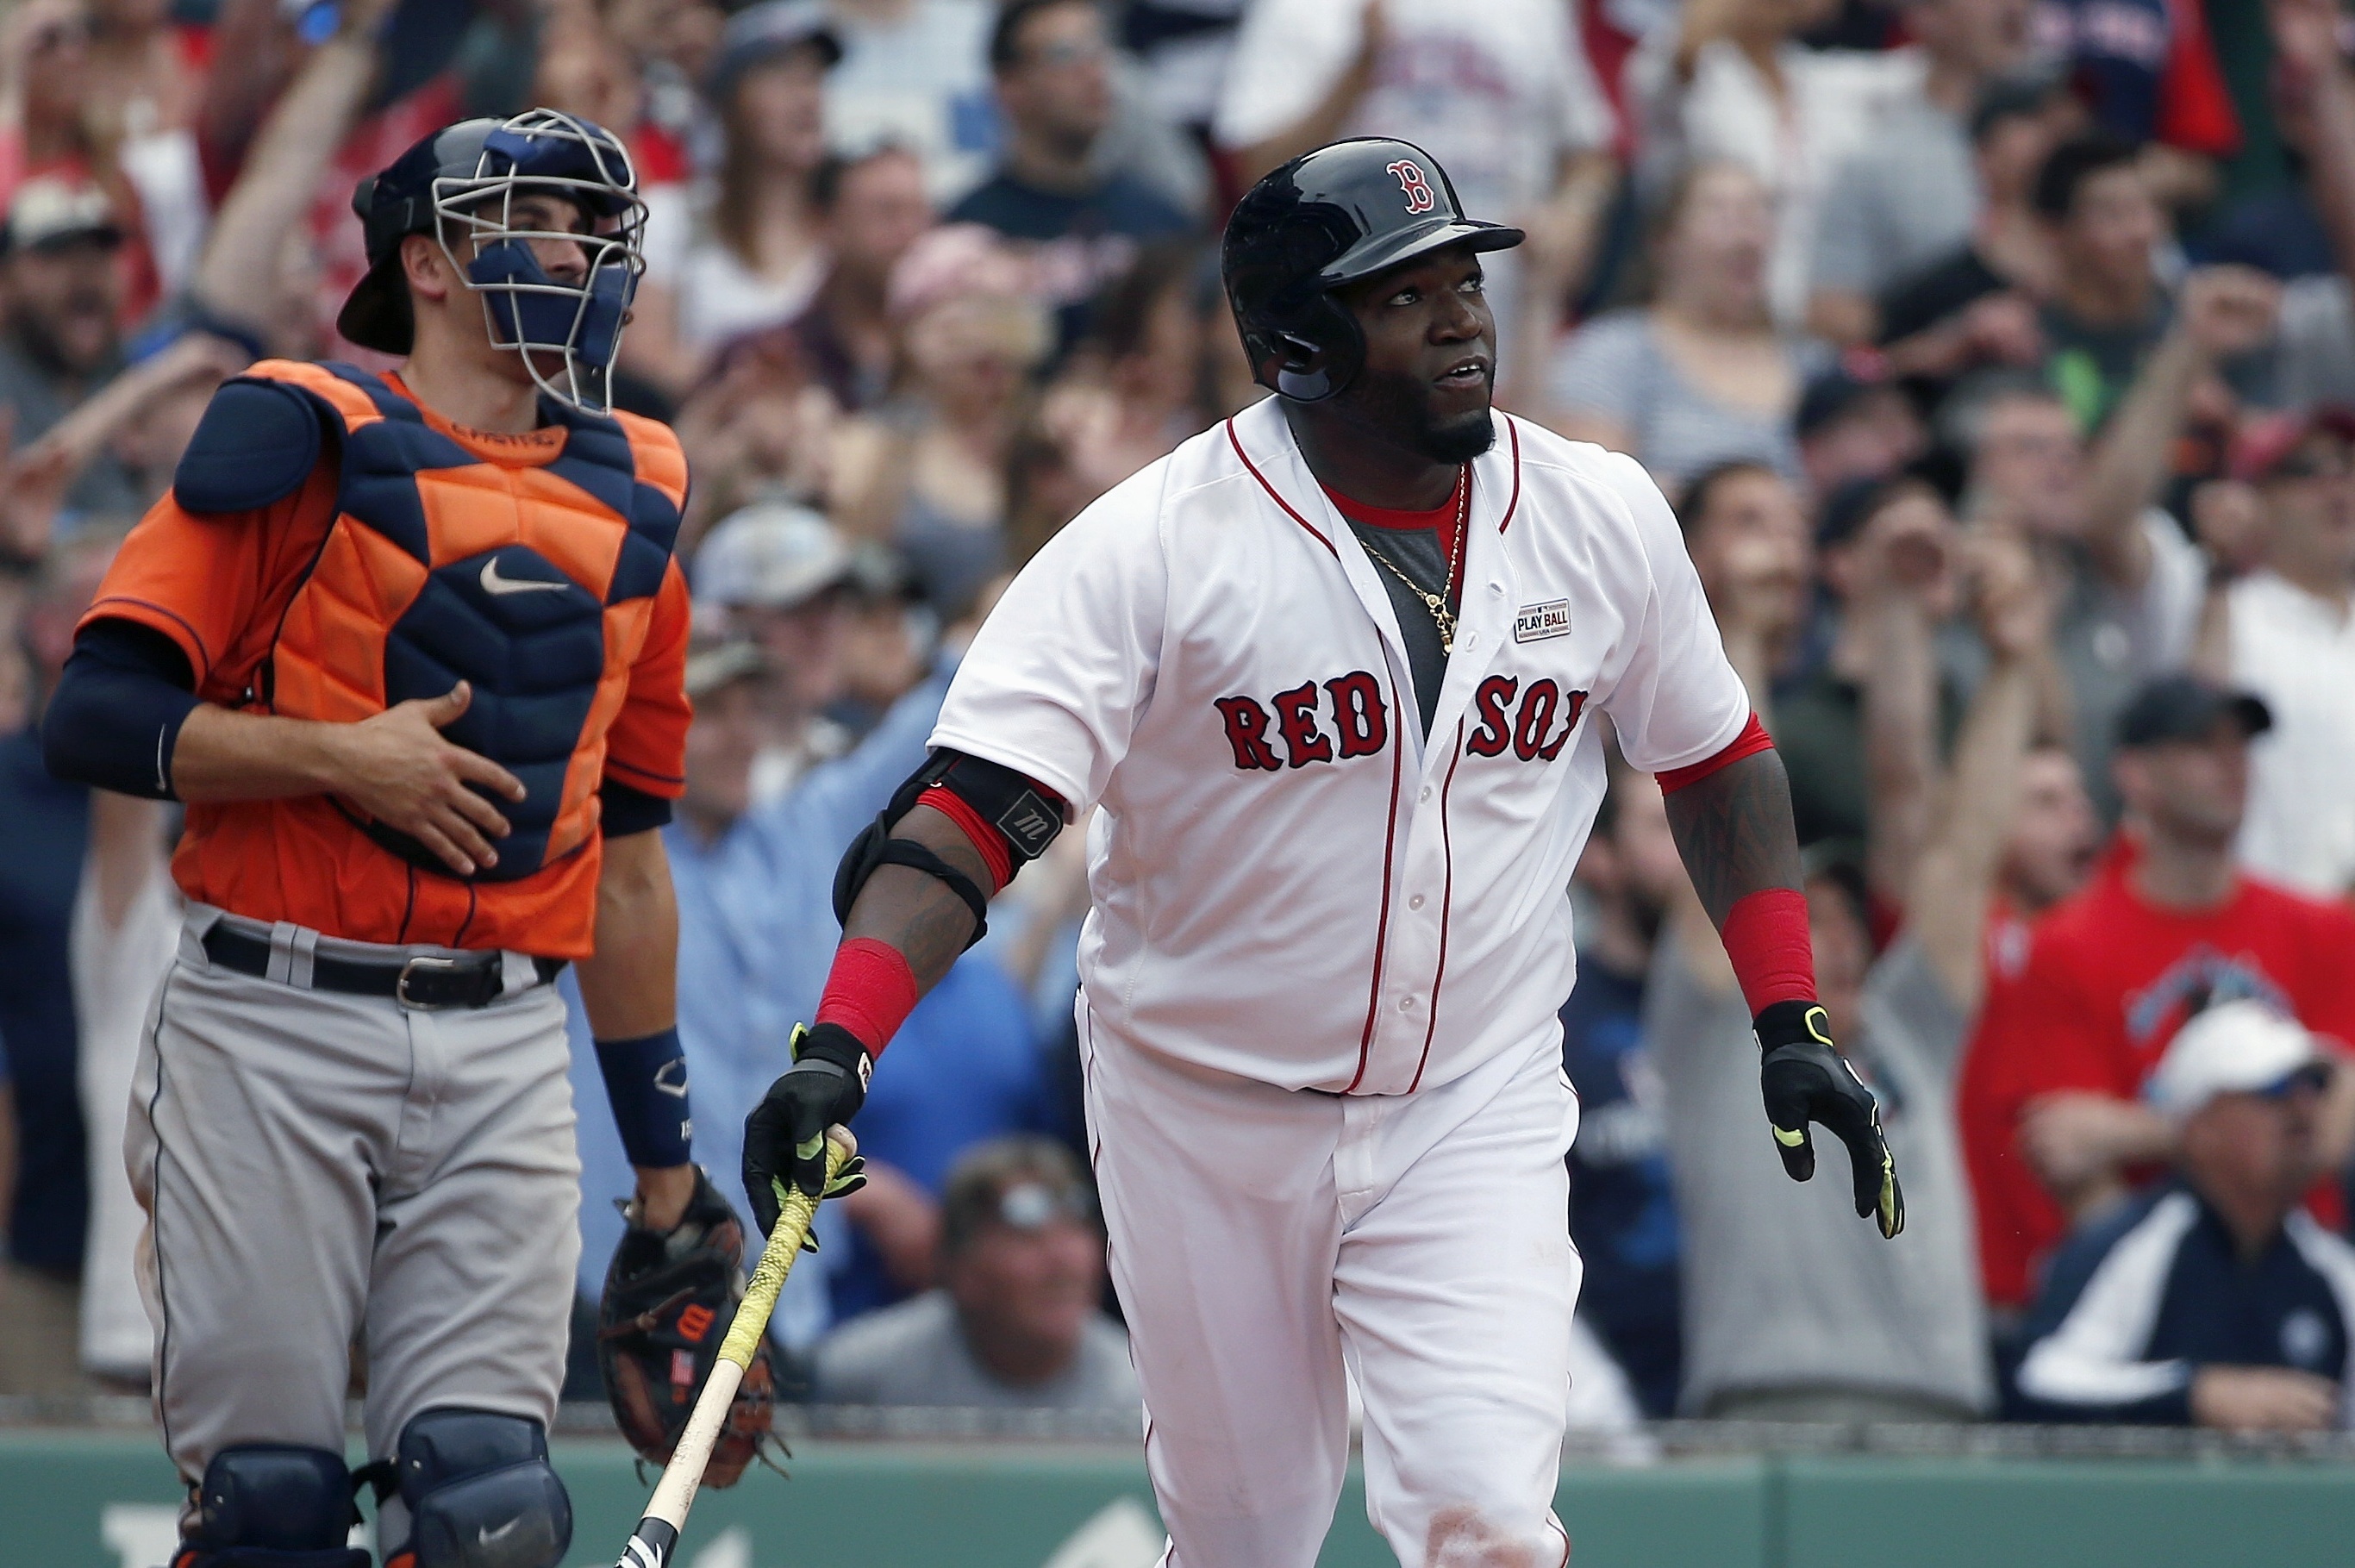 Big Papi power: Hot-hitting Ortiz paces Sox over Astros